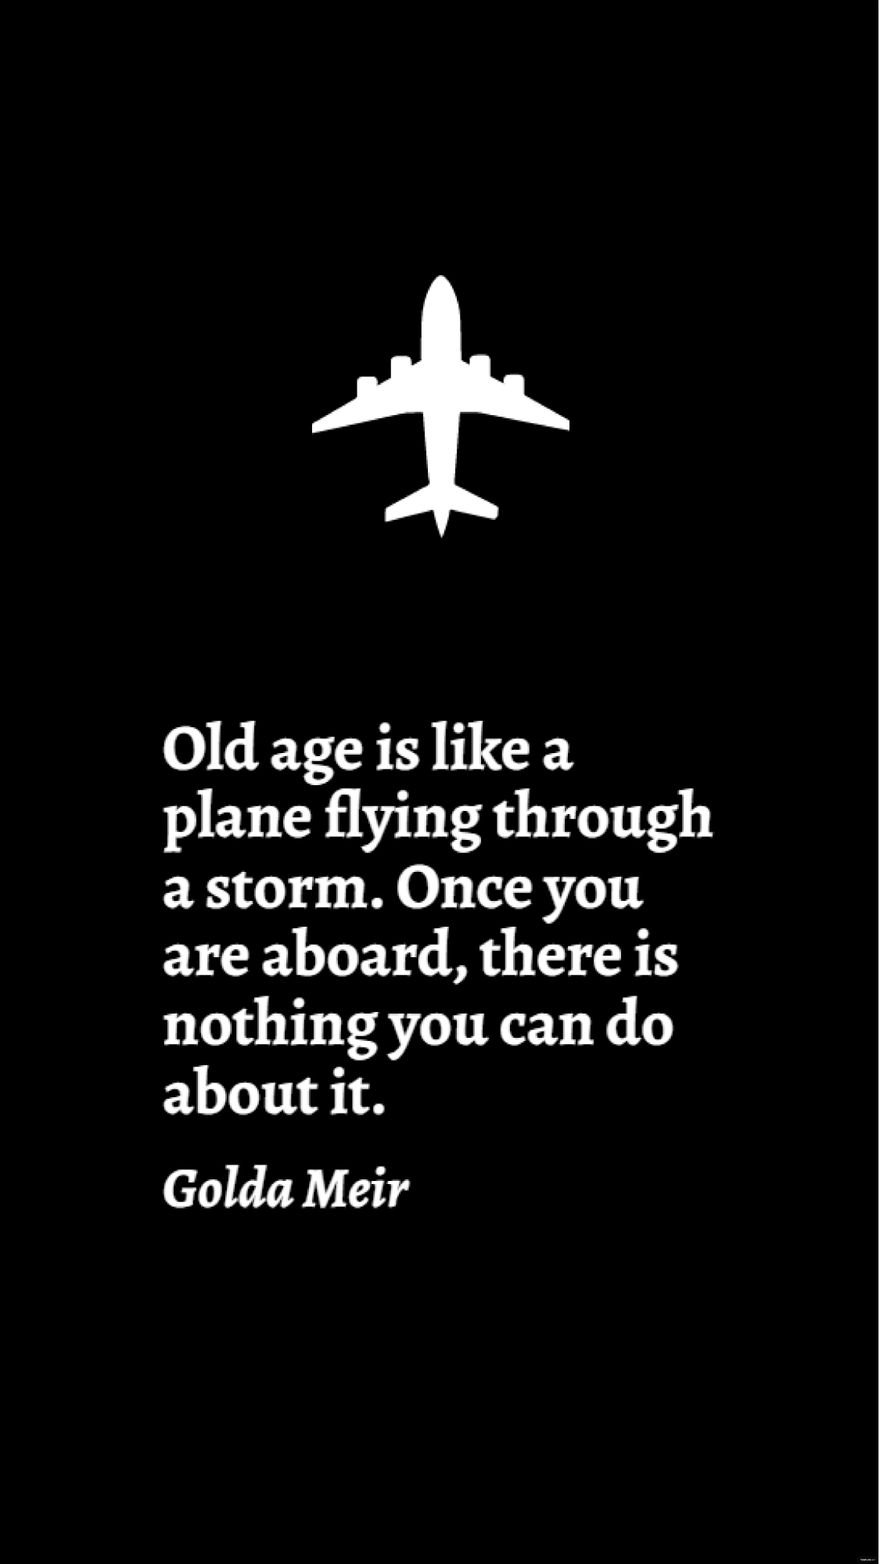 Free Golda Meir - Old age is like a plane flying through a storm. Once you are aboard, there is nothing you can do about it. in JPG